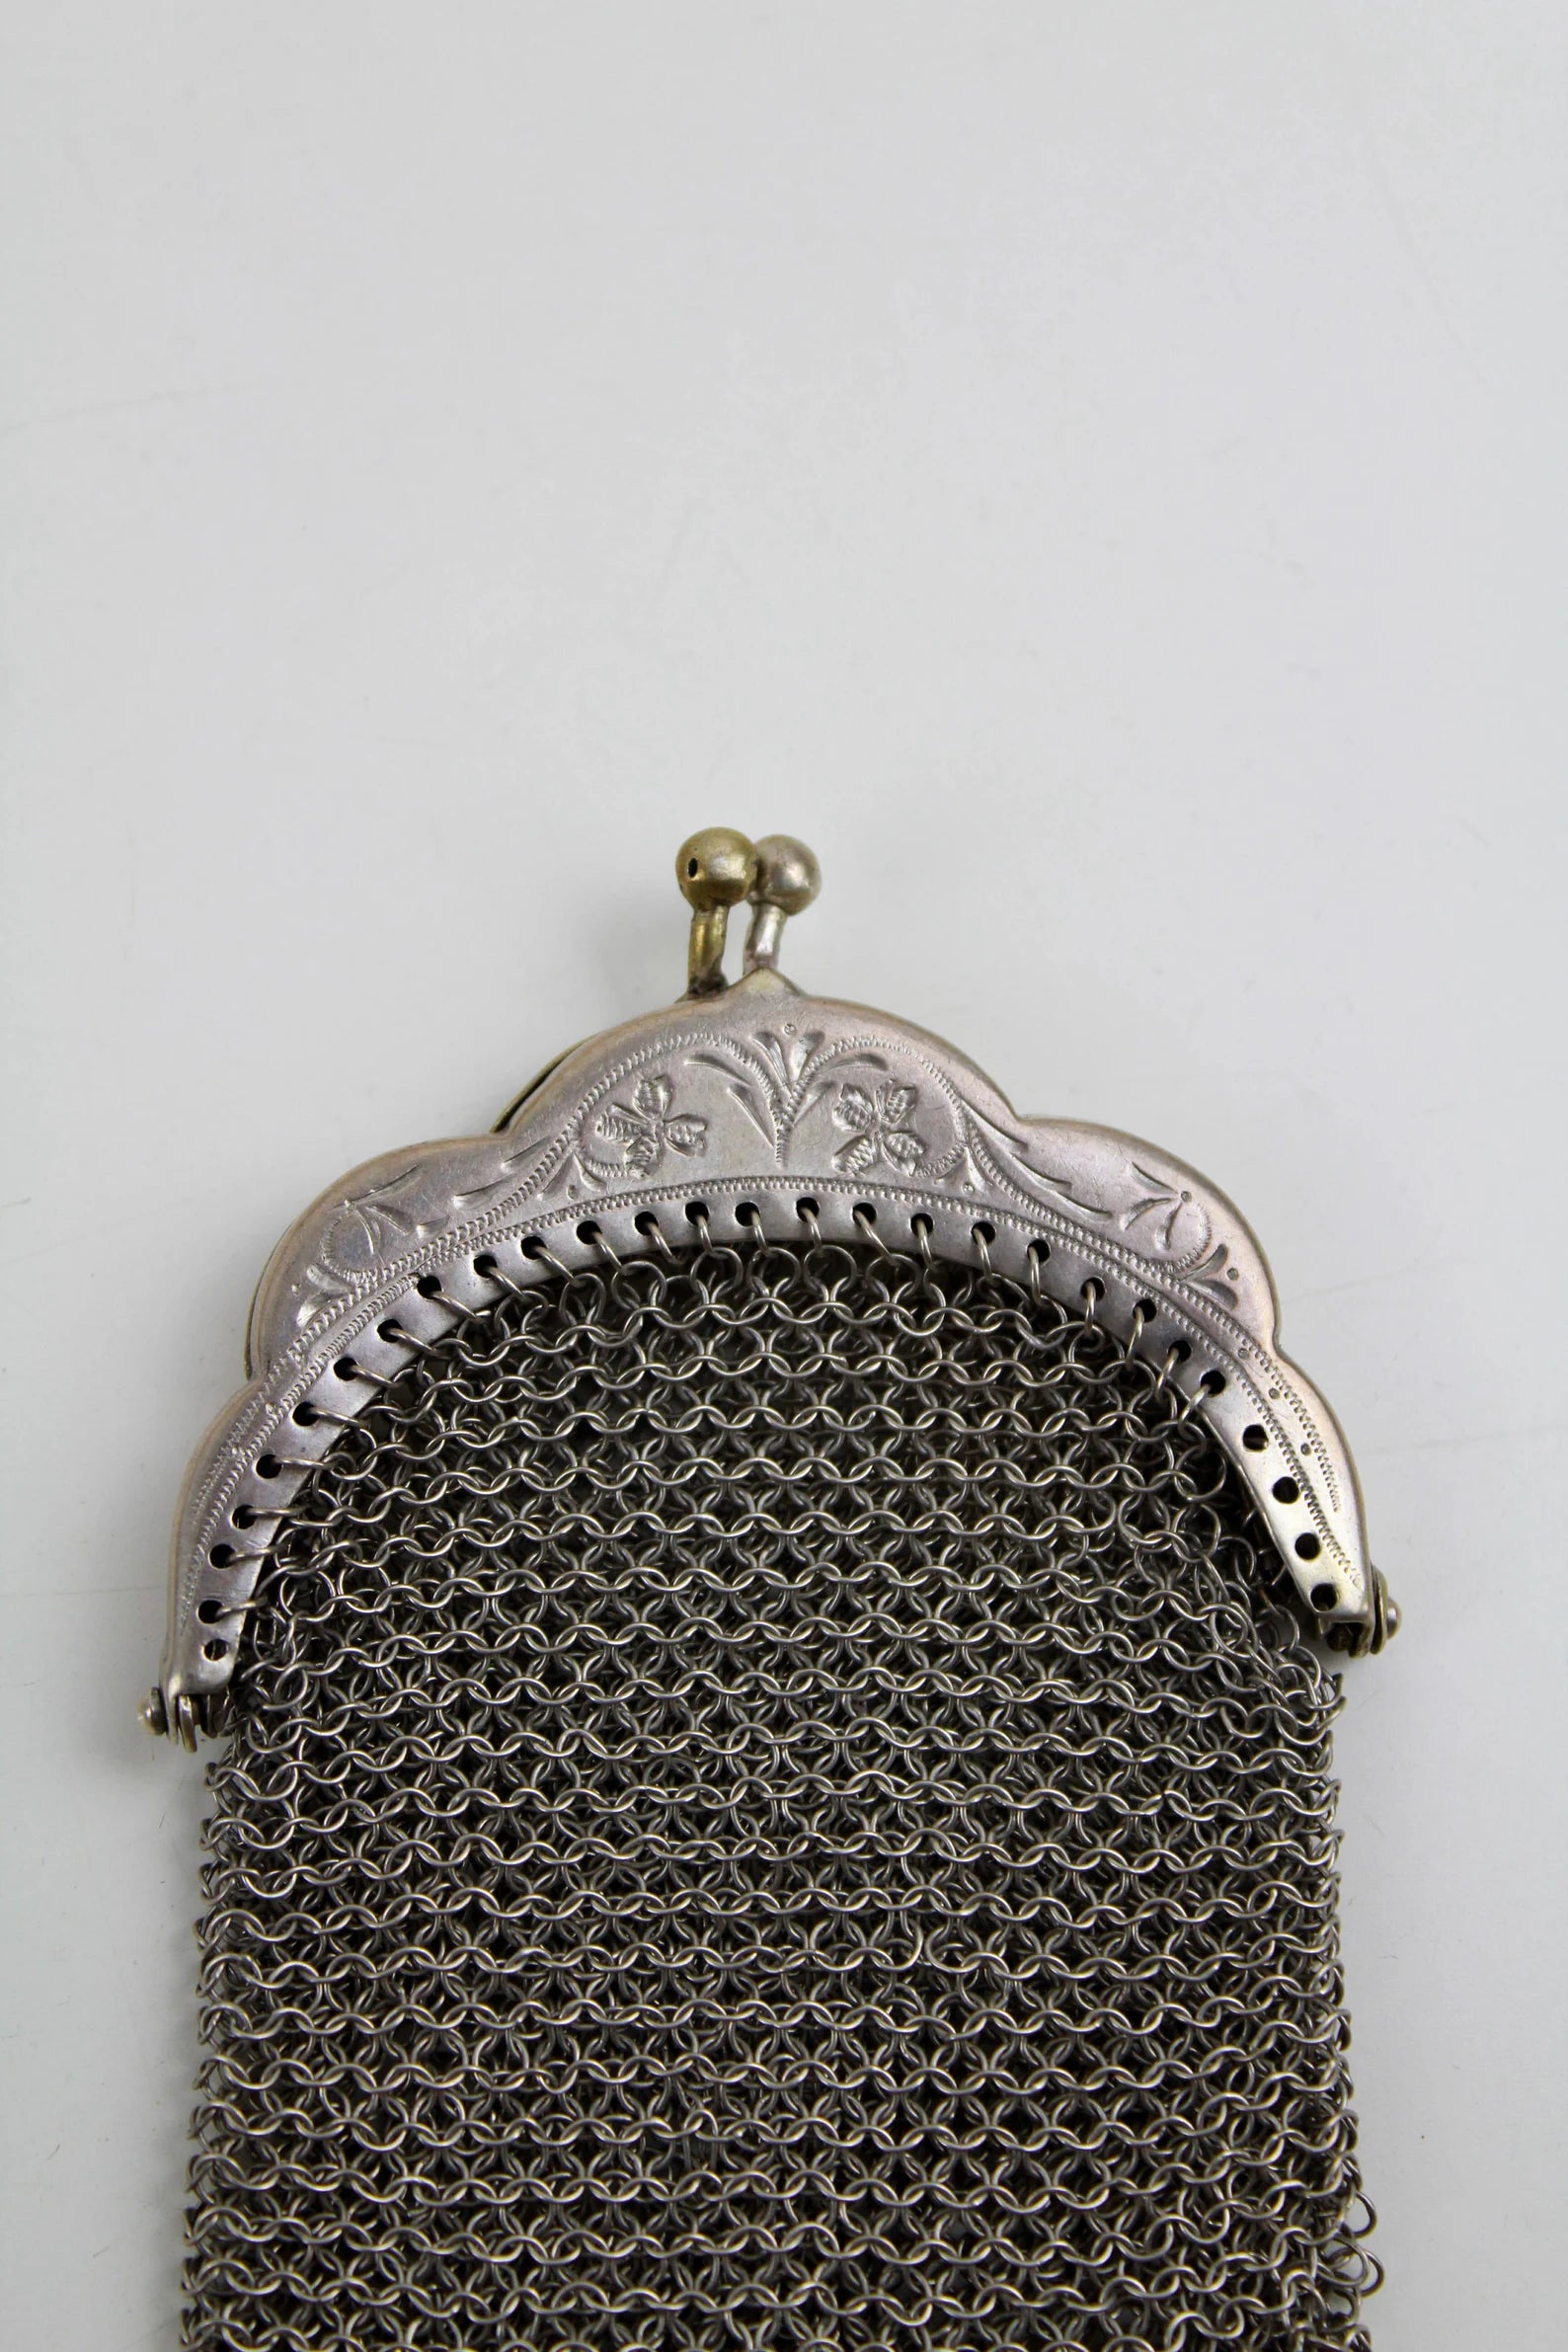 Amazon.com: Indian Vintage Style Silver-Toned Metal Agate Stones Novelty  Fashion Bag Purse : Clothing, Shoes & Jewelry